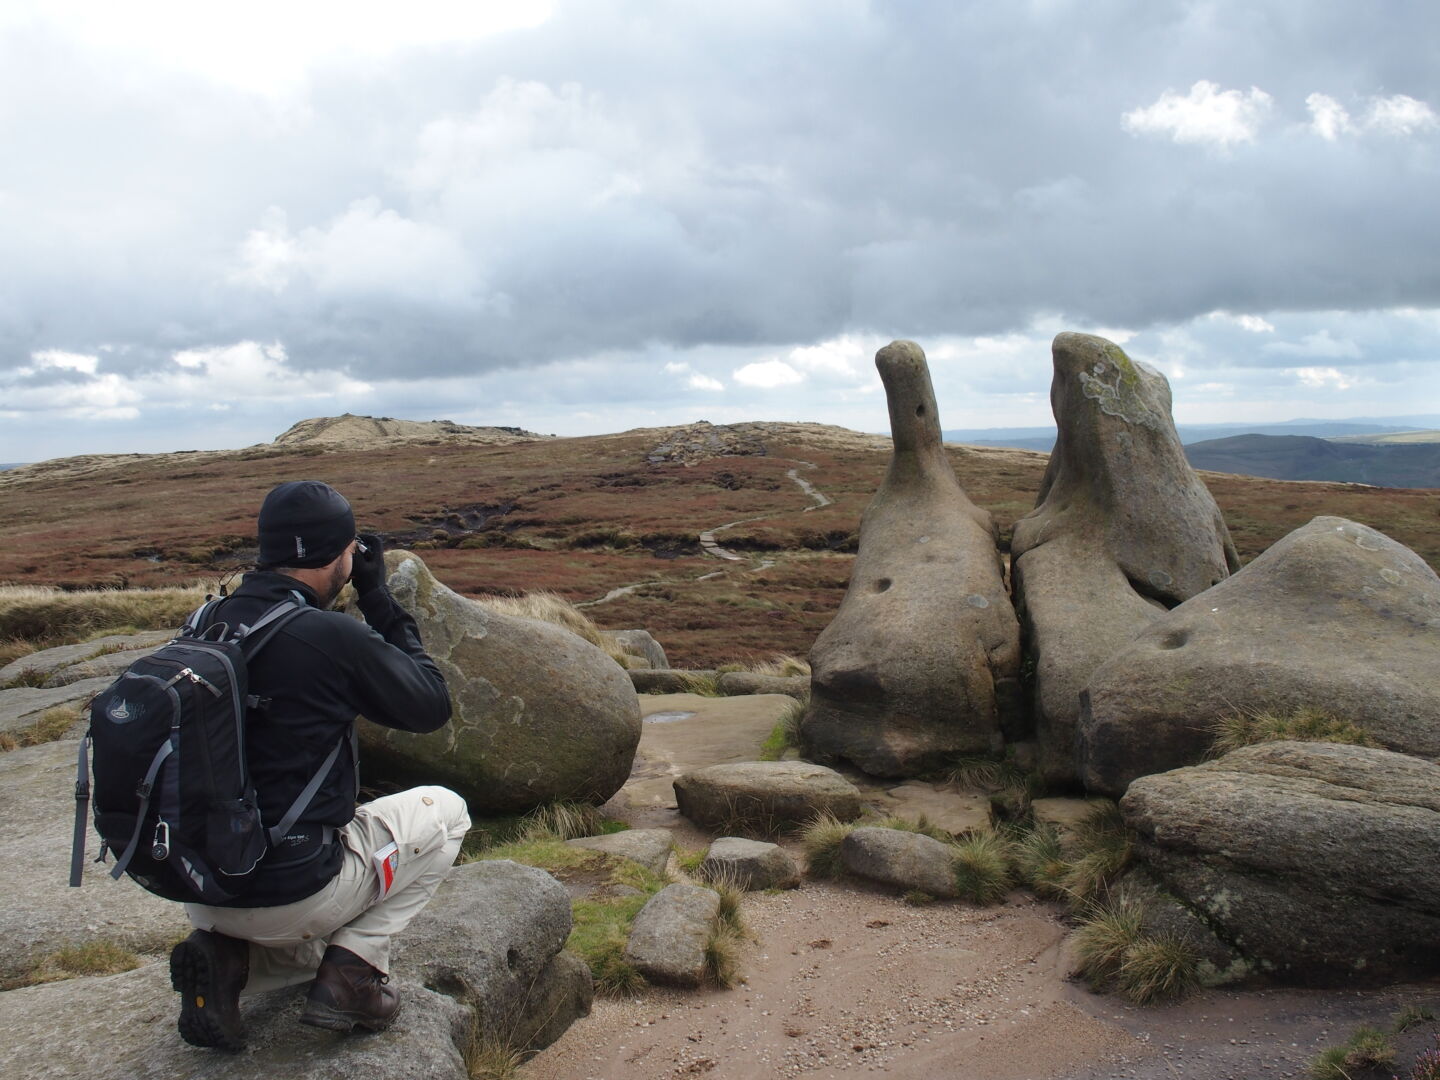 Taking pictures on Kinder Scout.